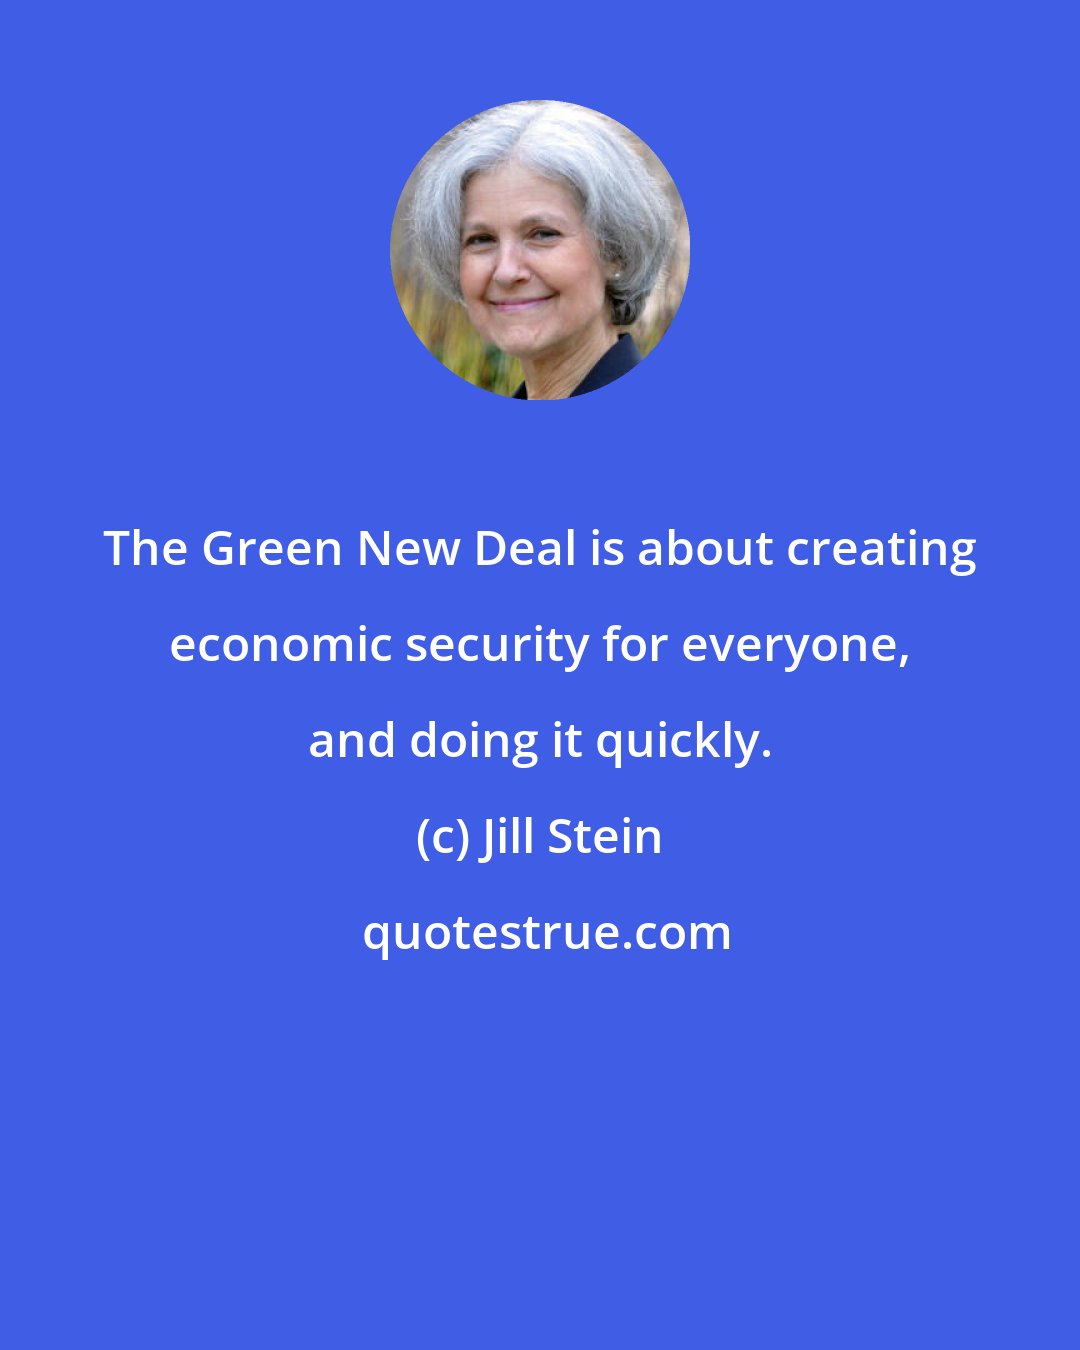 Jill Stein: The Green New Deal is about creating economic security for everyone, and doing it quickly.